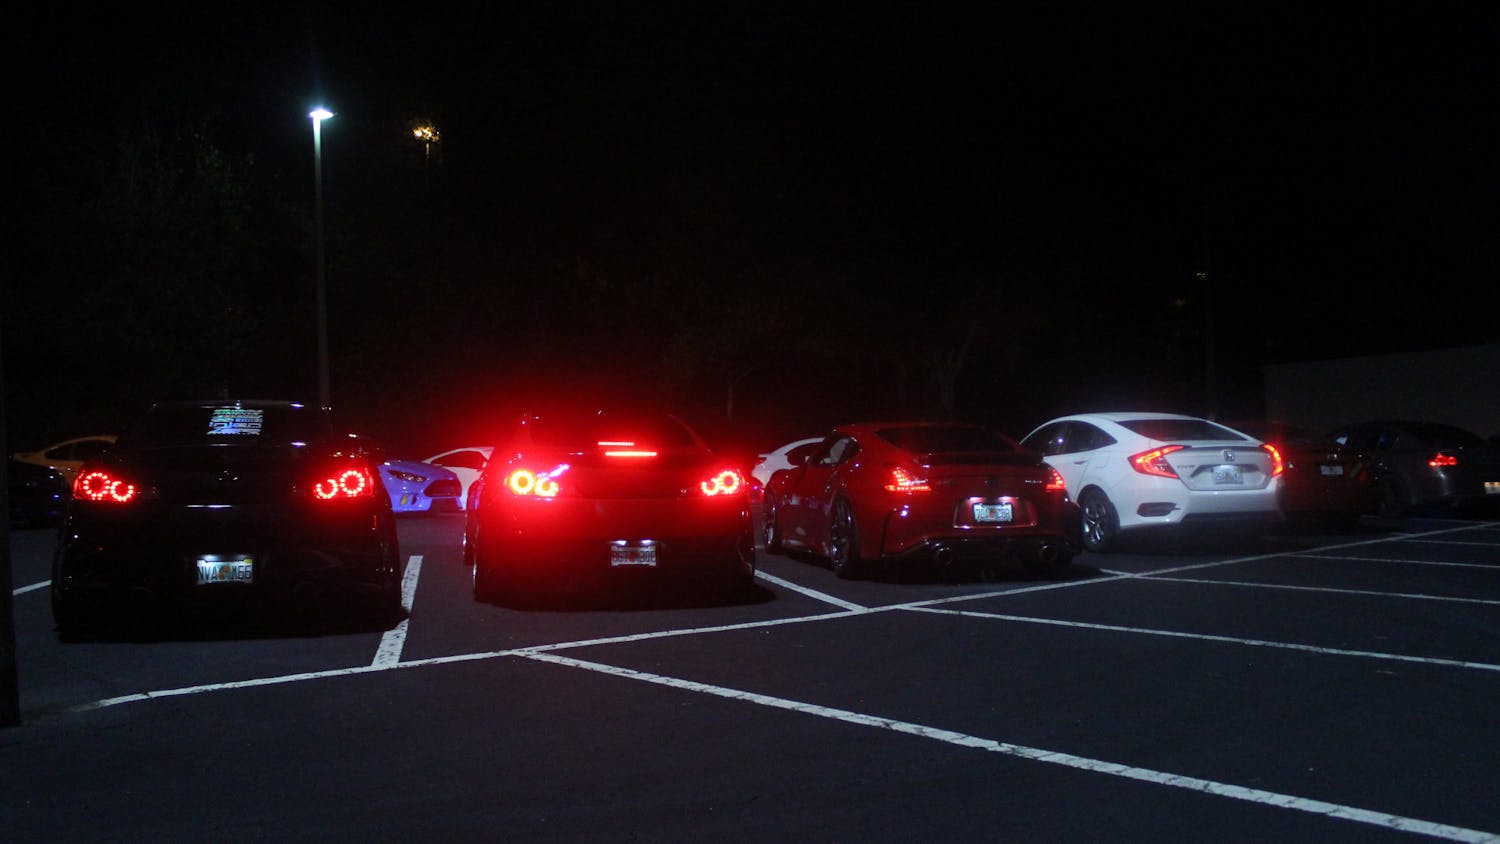 Members of the Gainesville car scene liven empty parking lots Tuesdays and Fridays with headlights and car speakers, as pictured Friday, June 10, 2022.